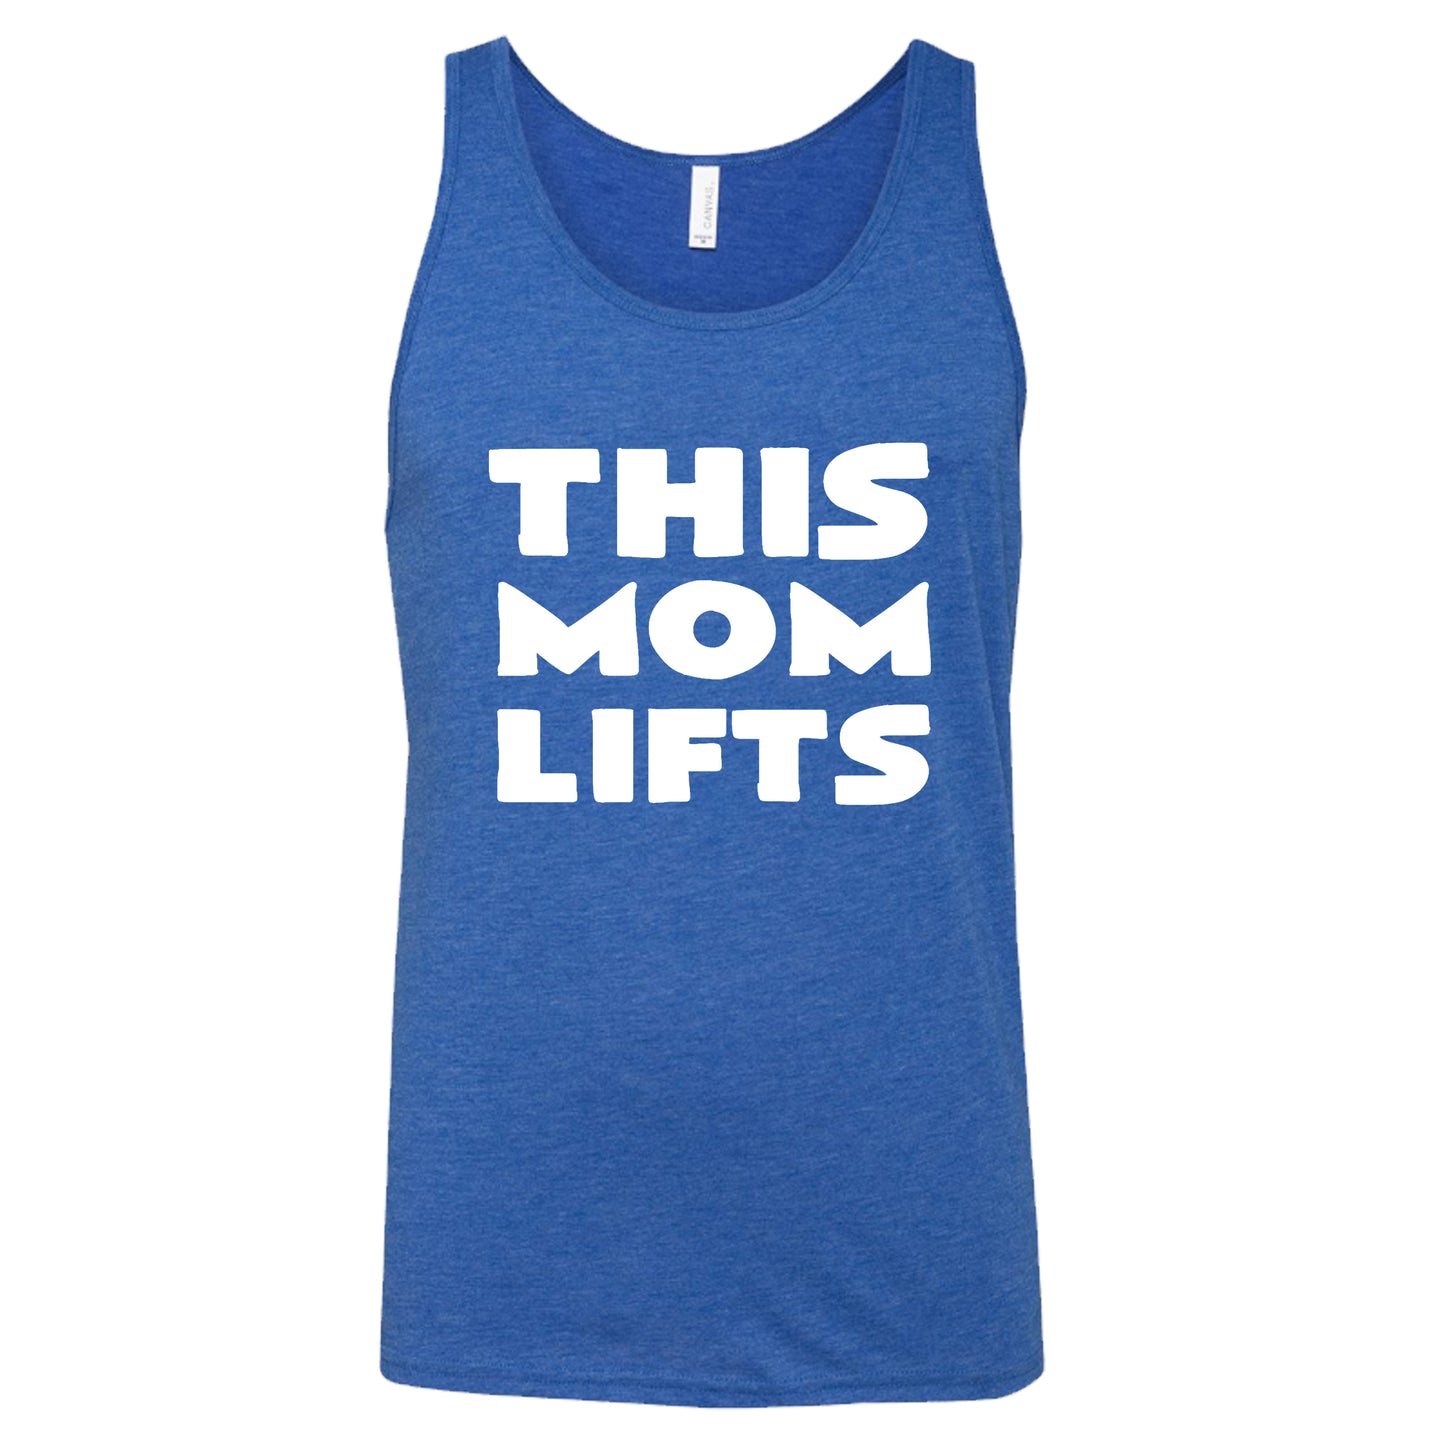 blue unisex tank with the saying "this mom lifts" in the center in white lettering